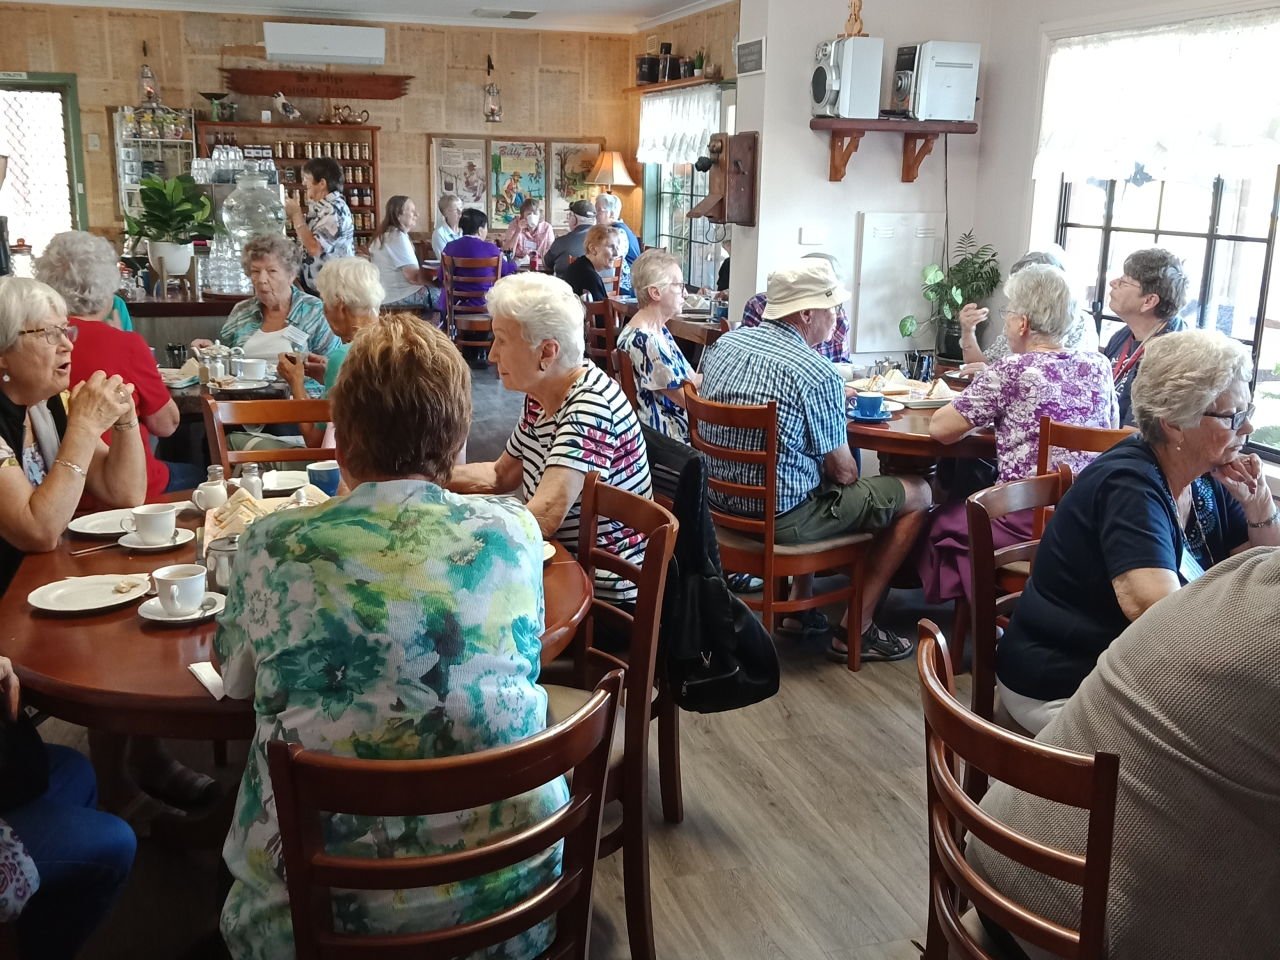 Returning from our annual holiday in Ballarat and Bendigo in March 2019, we had a wonderful lunch break at Dad and Dave's Billy Tea Rooms.